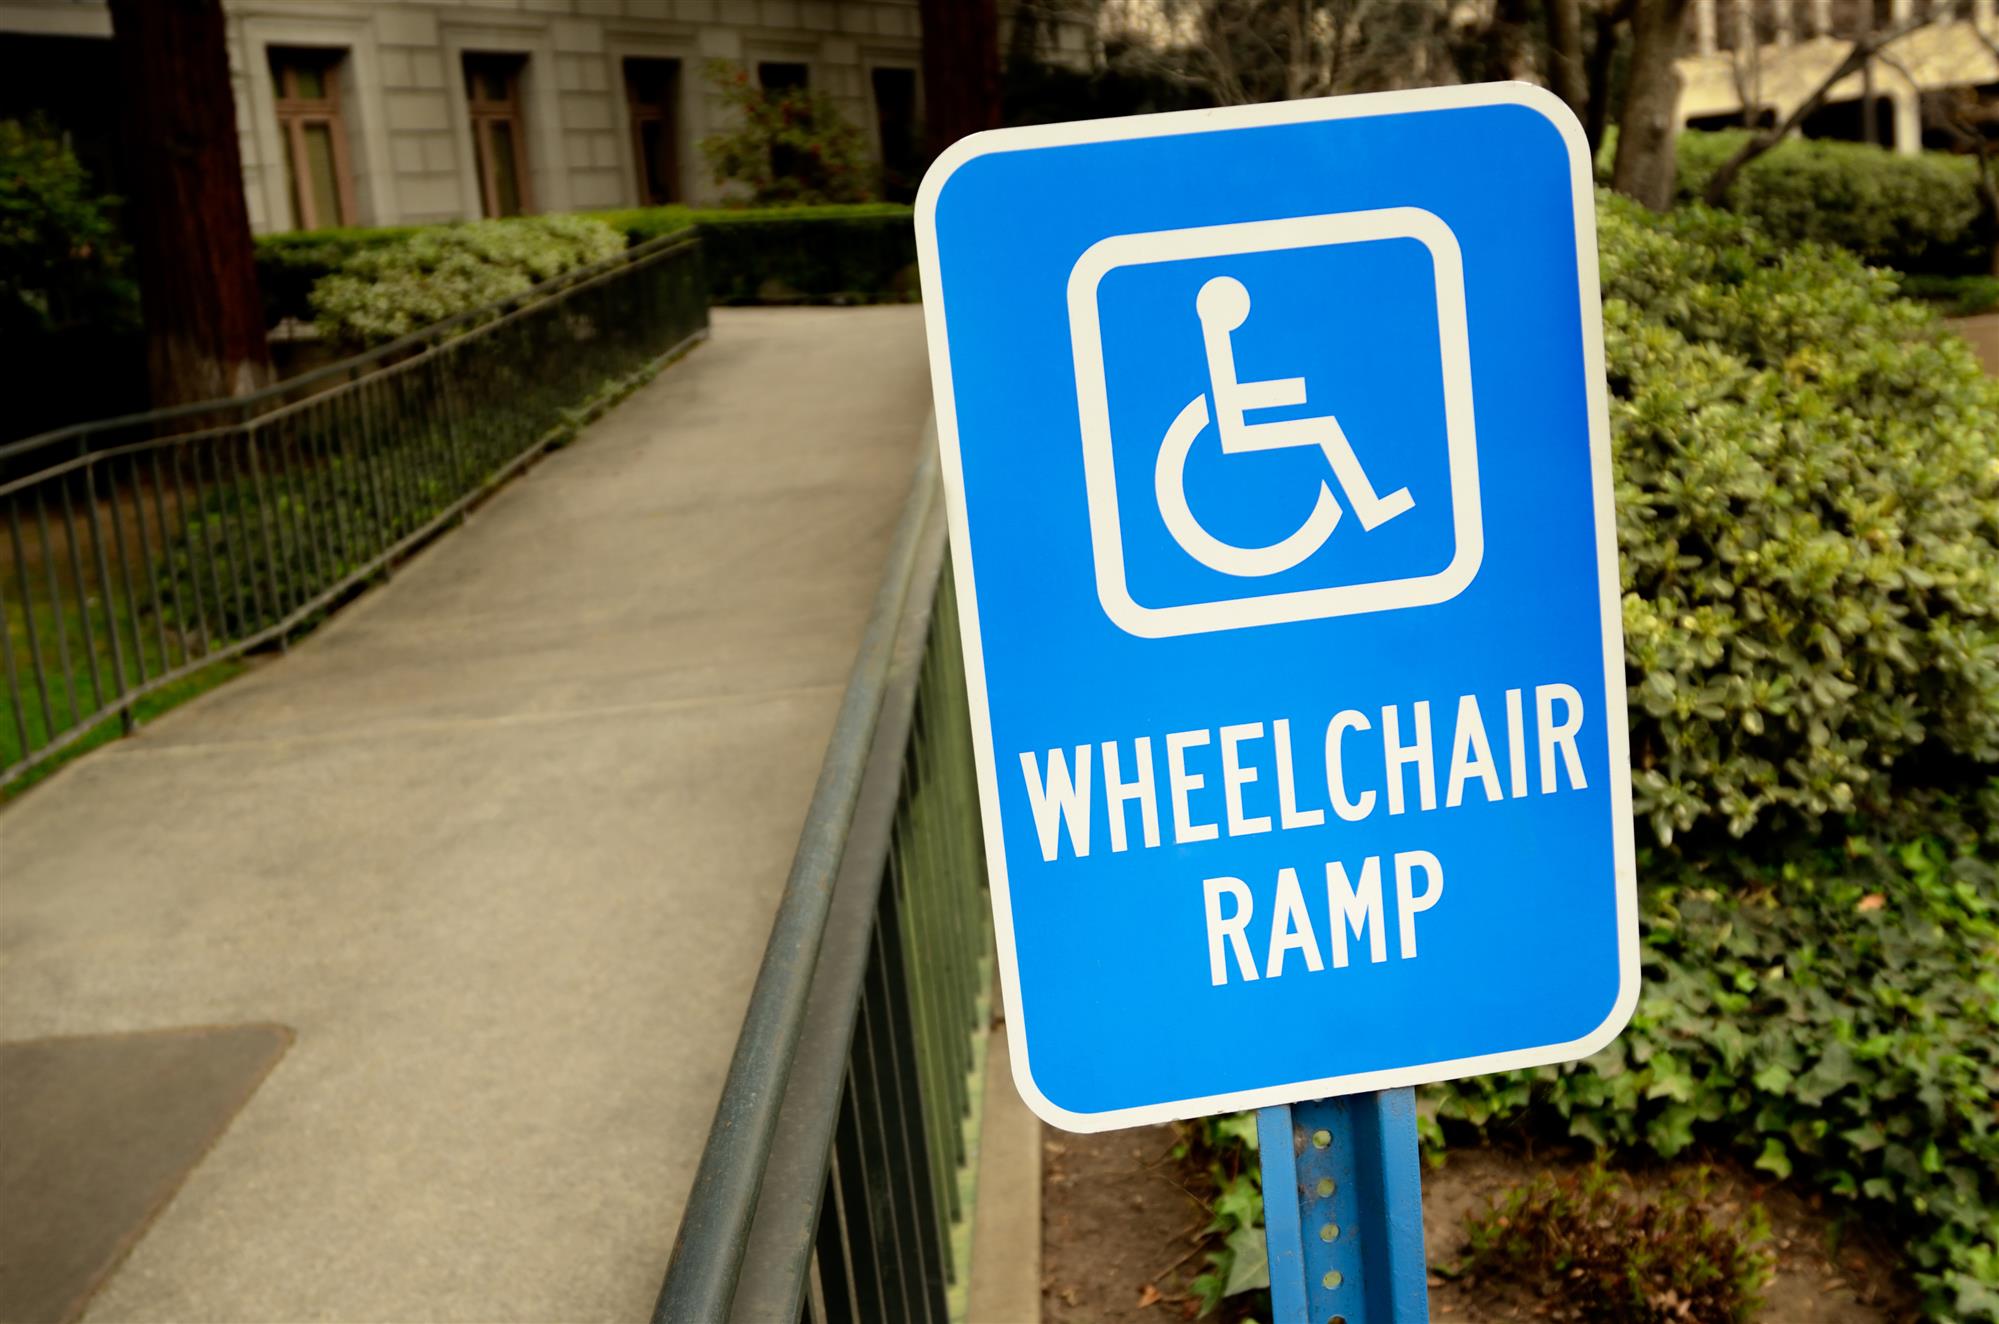 Ada Ramp Requirements, What Are The Ada Guidelines For Wheelchair Ramps